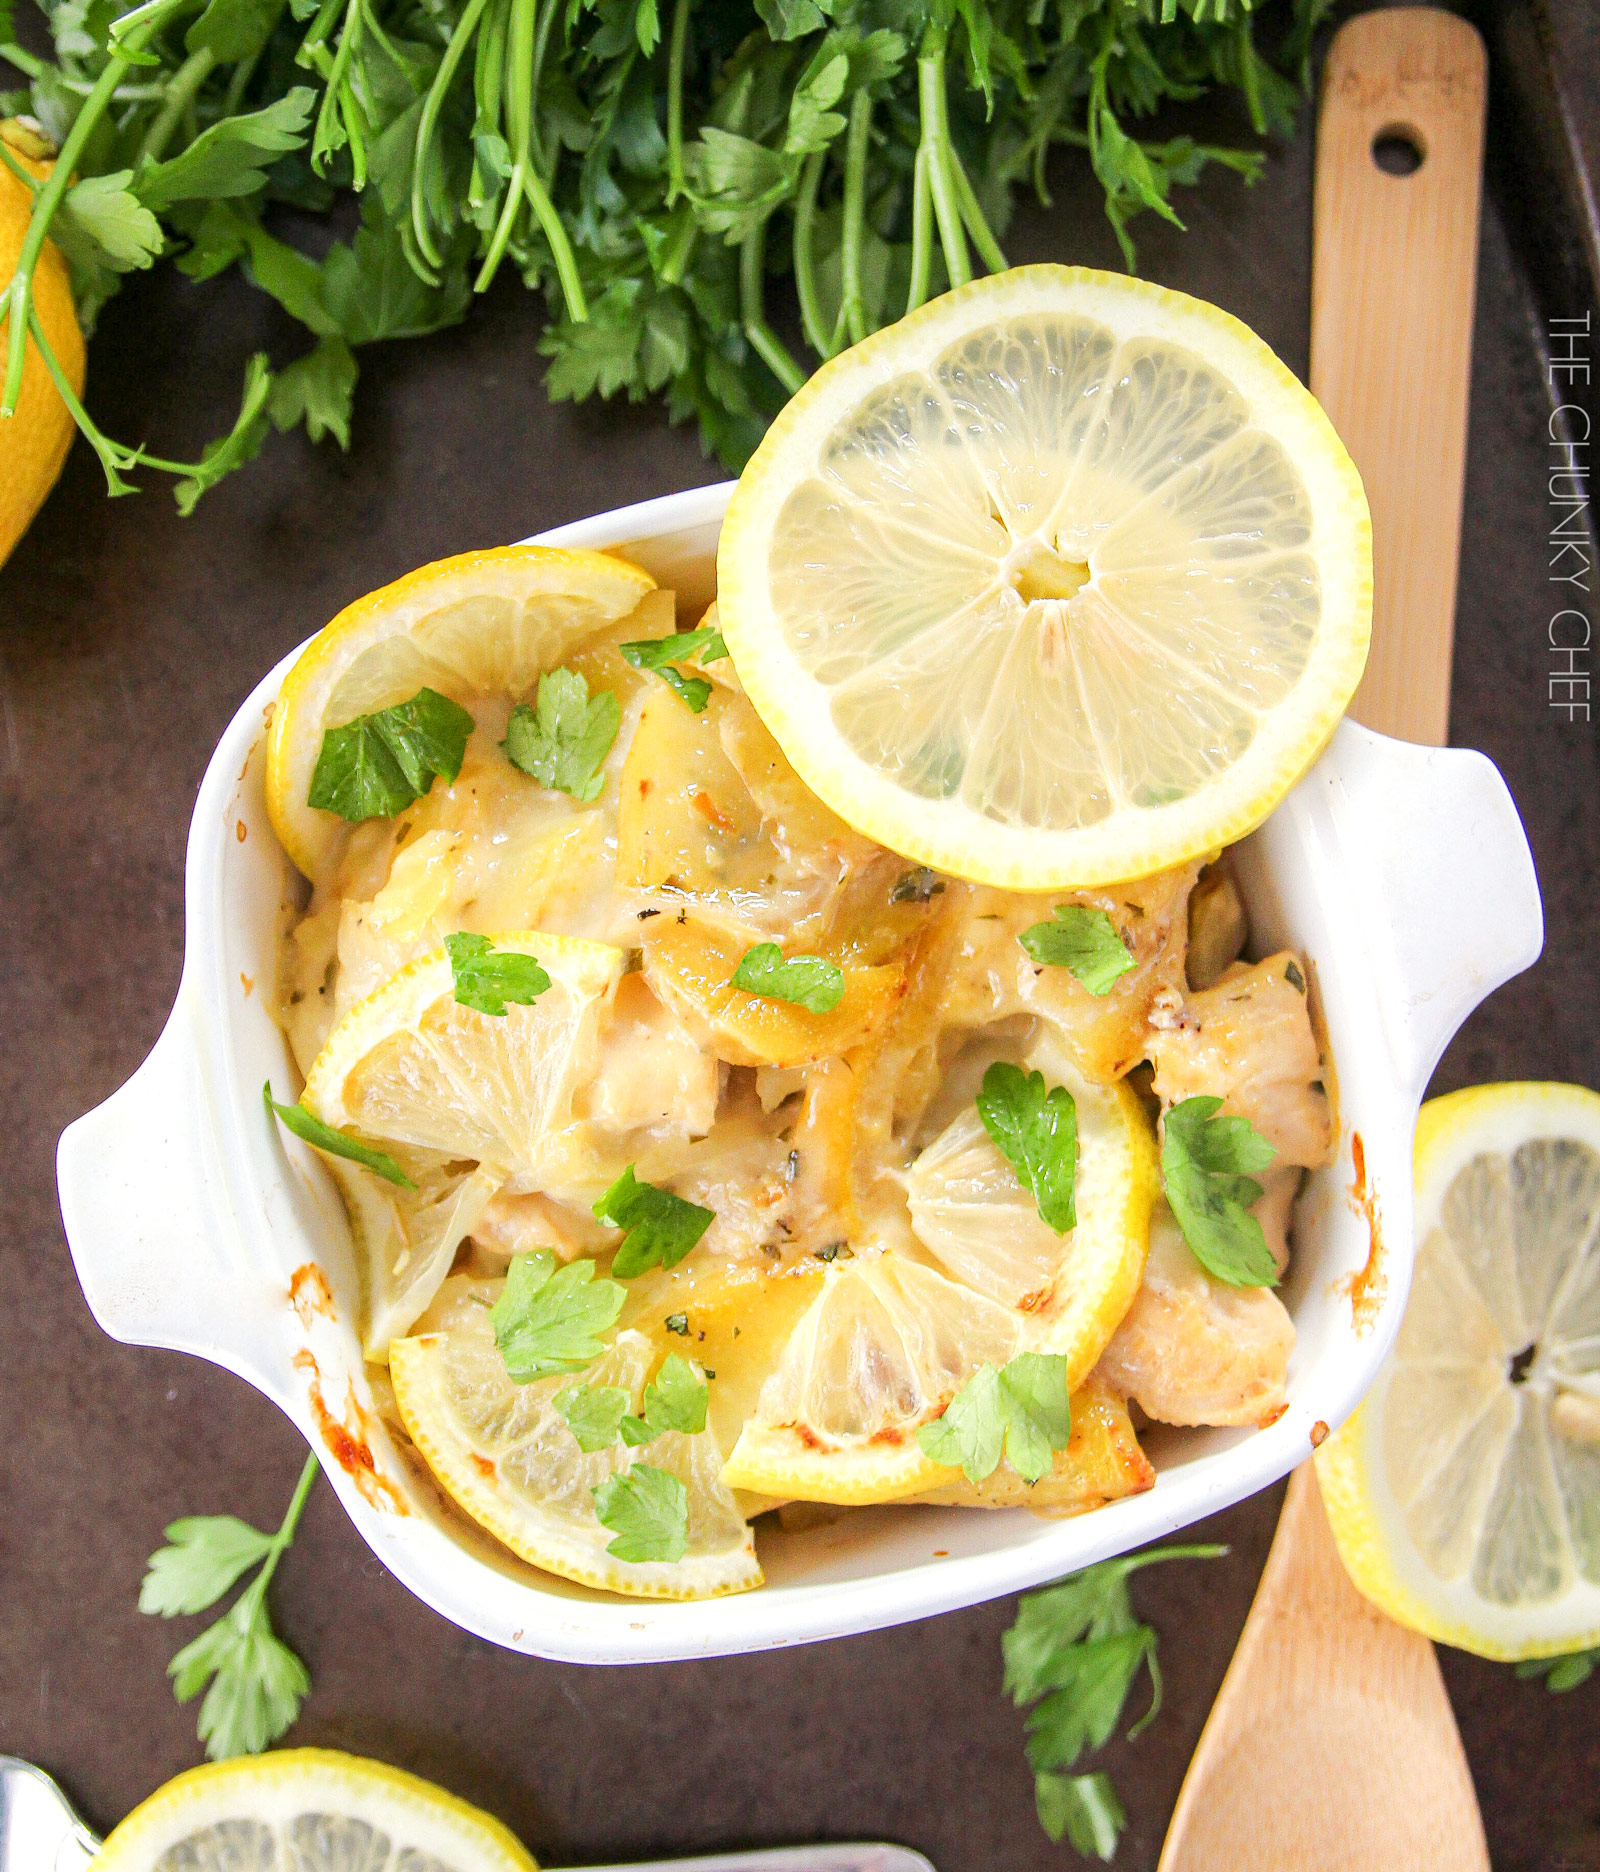 Lemon Chicken and Potato Bake | Chicken and potatoes are baked with lemon slices in a creamy casserole that's sure to fill you up and make you smile! | http://thechunkychef.com